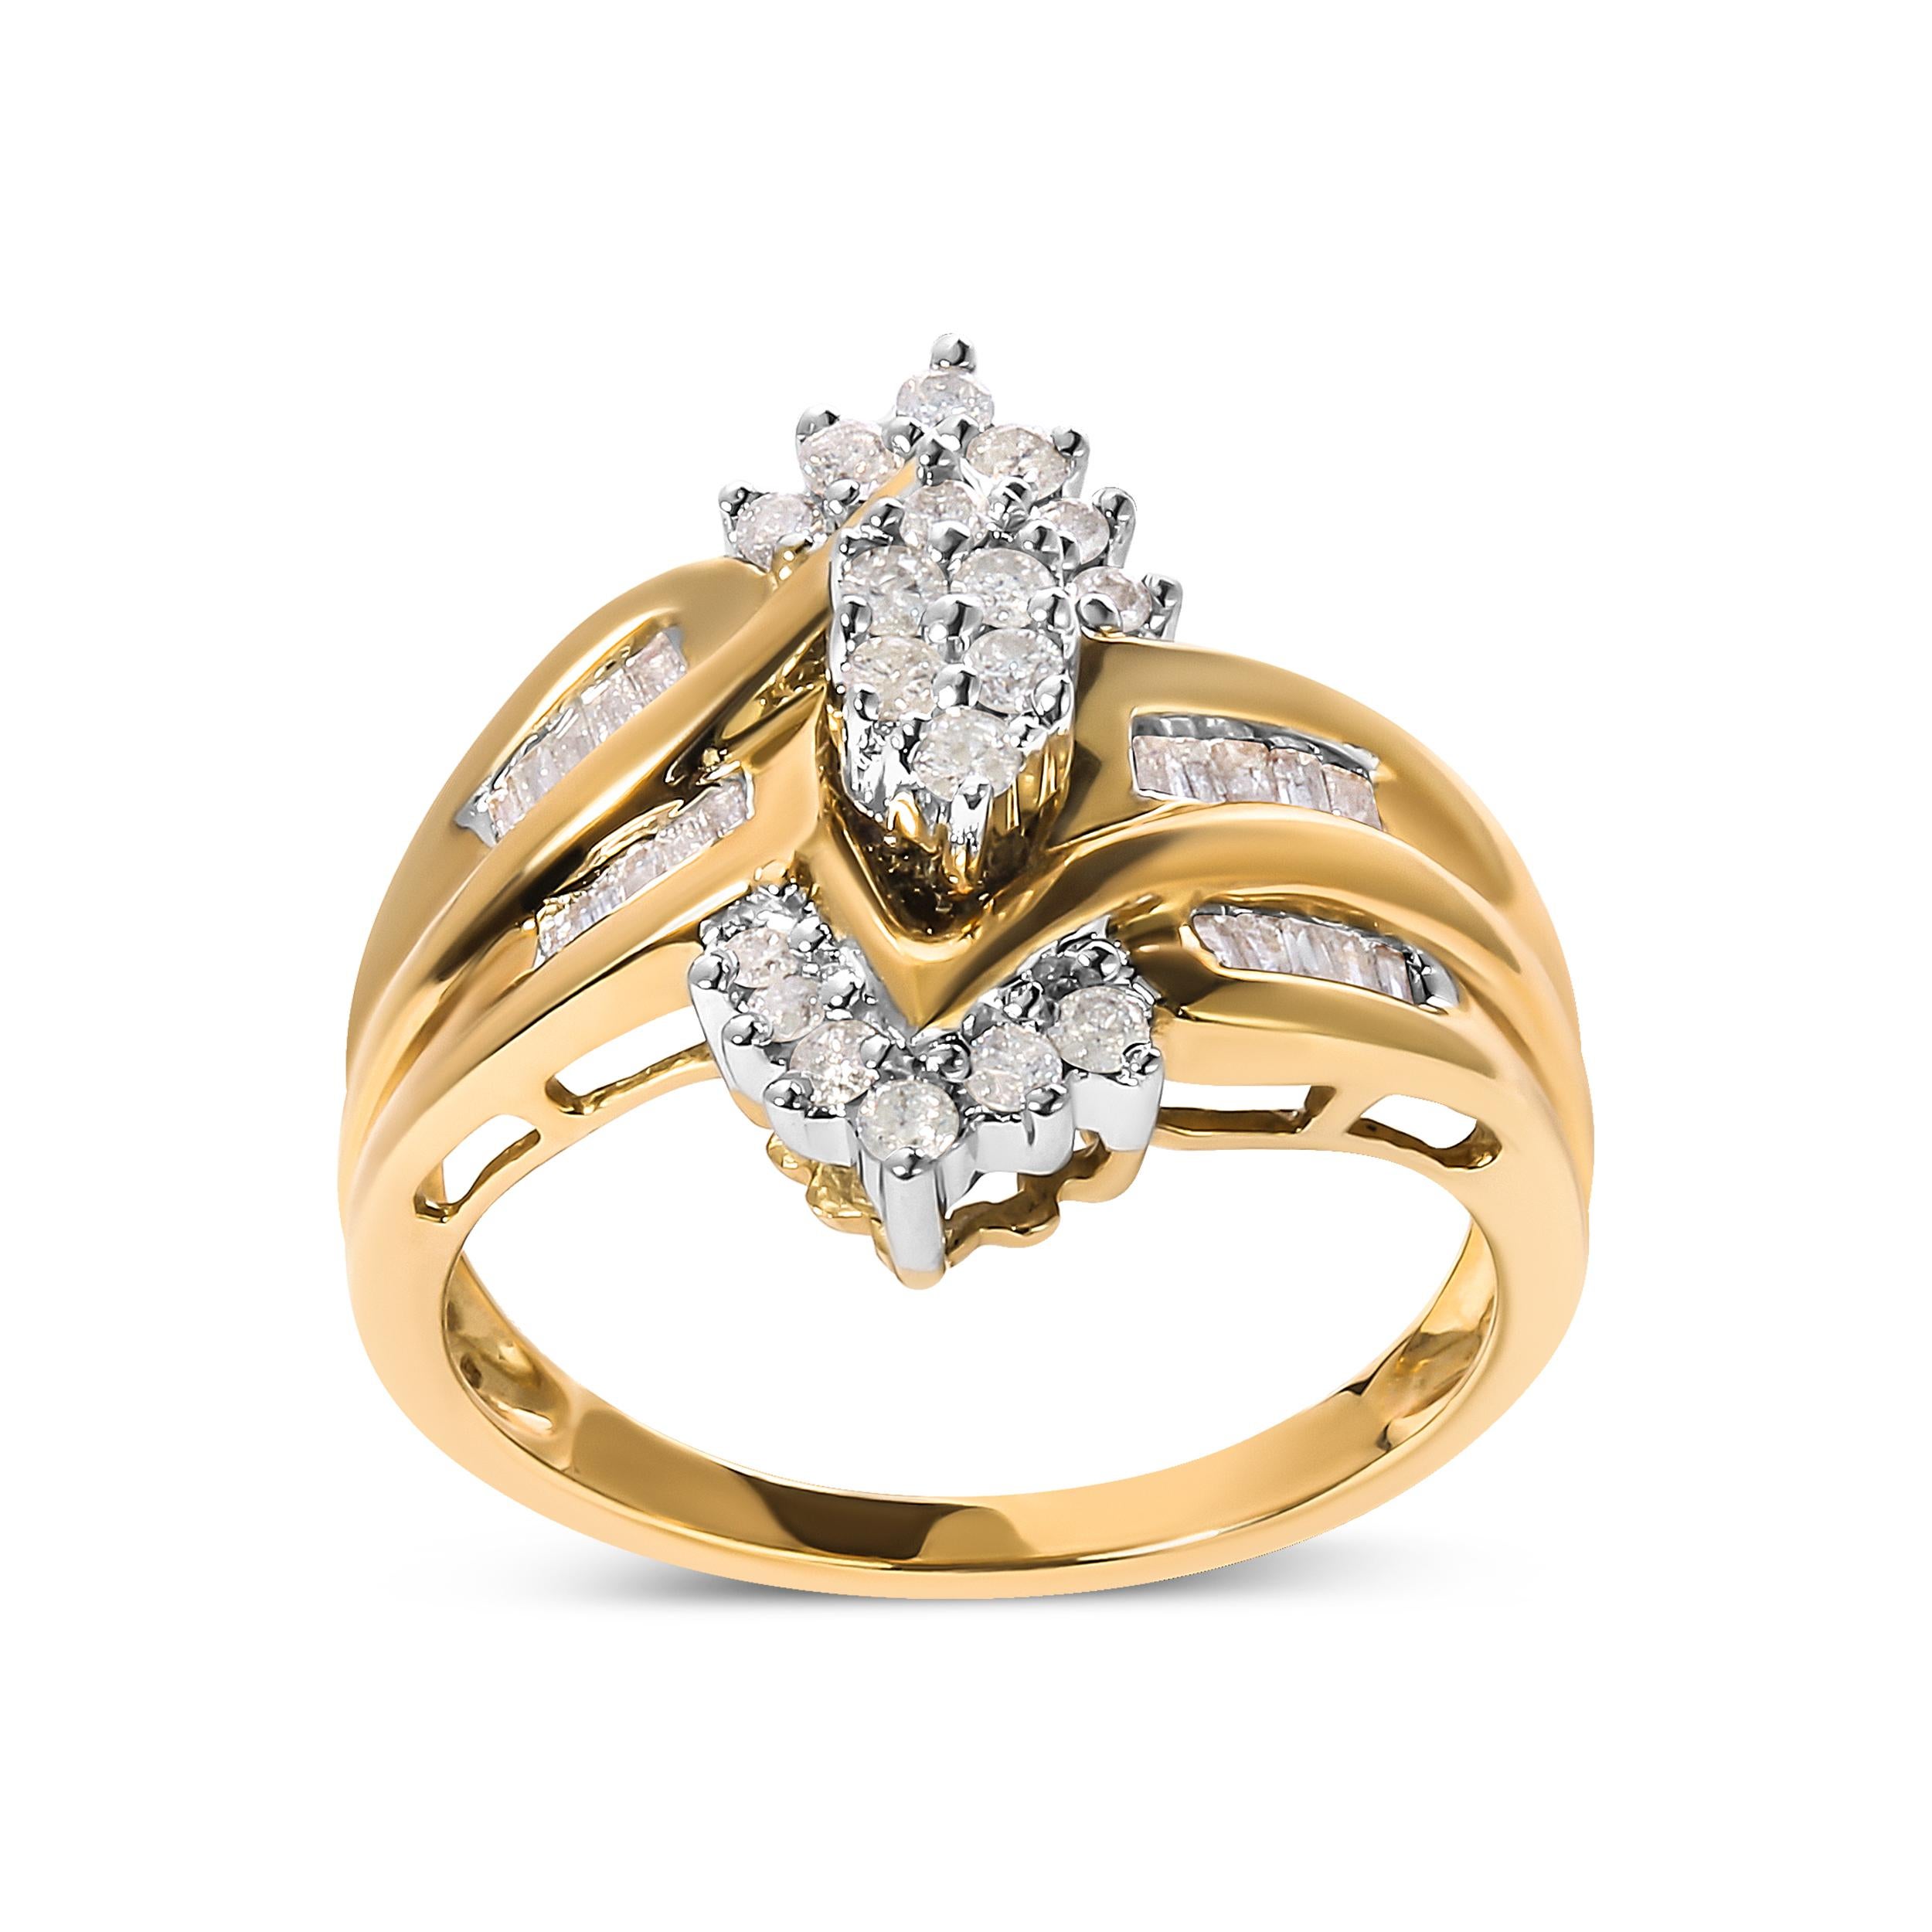 Elevate your style to new heights with our 10K two-toned fashion ring. This exquisite piece is a true embodiment of grace and sophistication, designed to capture hearts and ignite your inner radiance. Crafted in two-toned gold, the warm embrace of